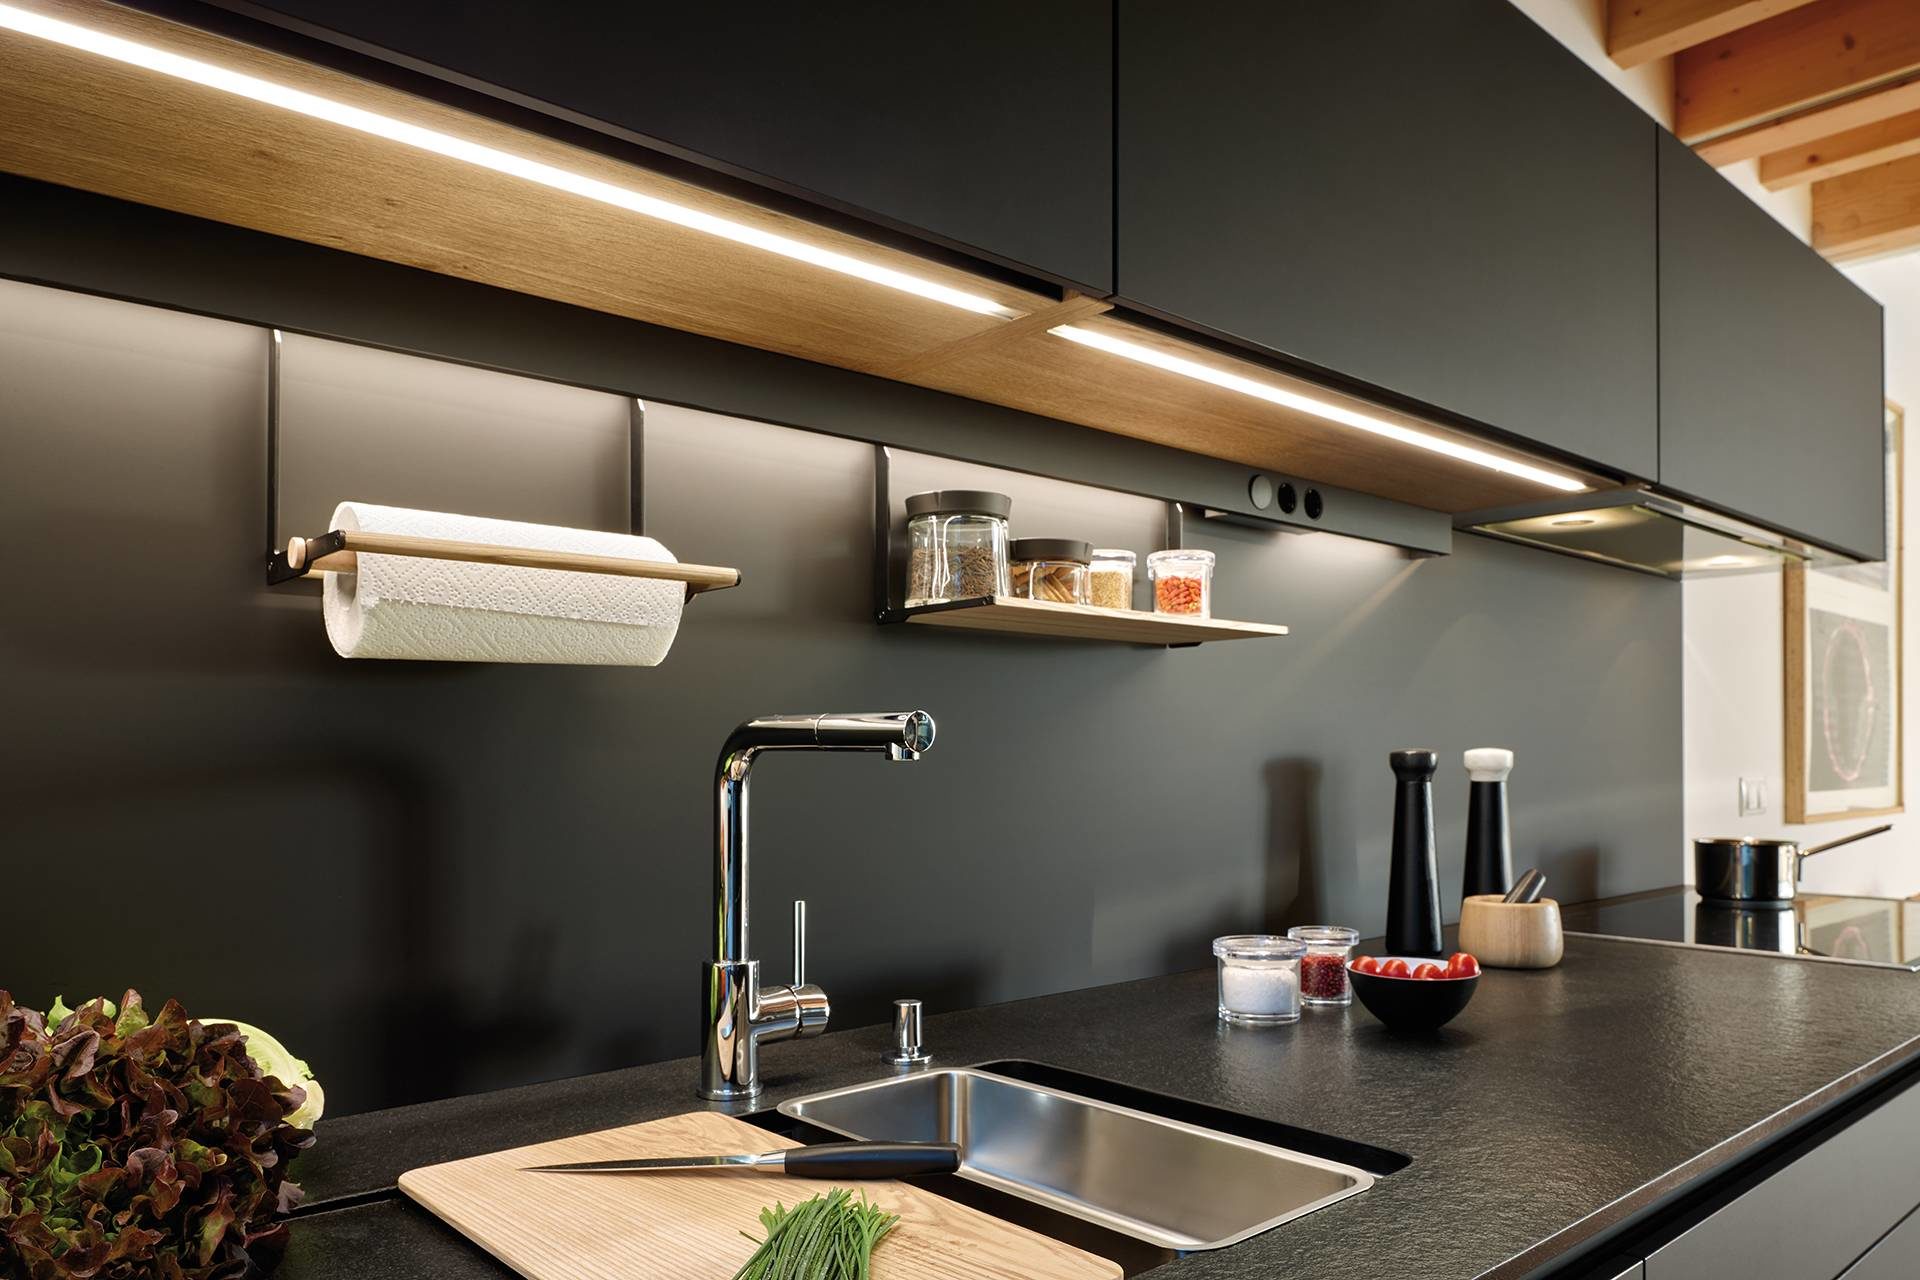 Image of kitchen with a lighting system designed by Santos